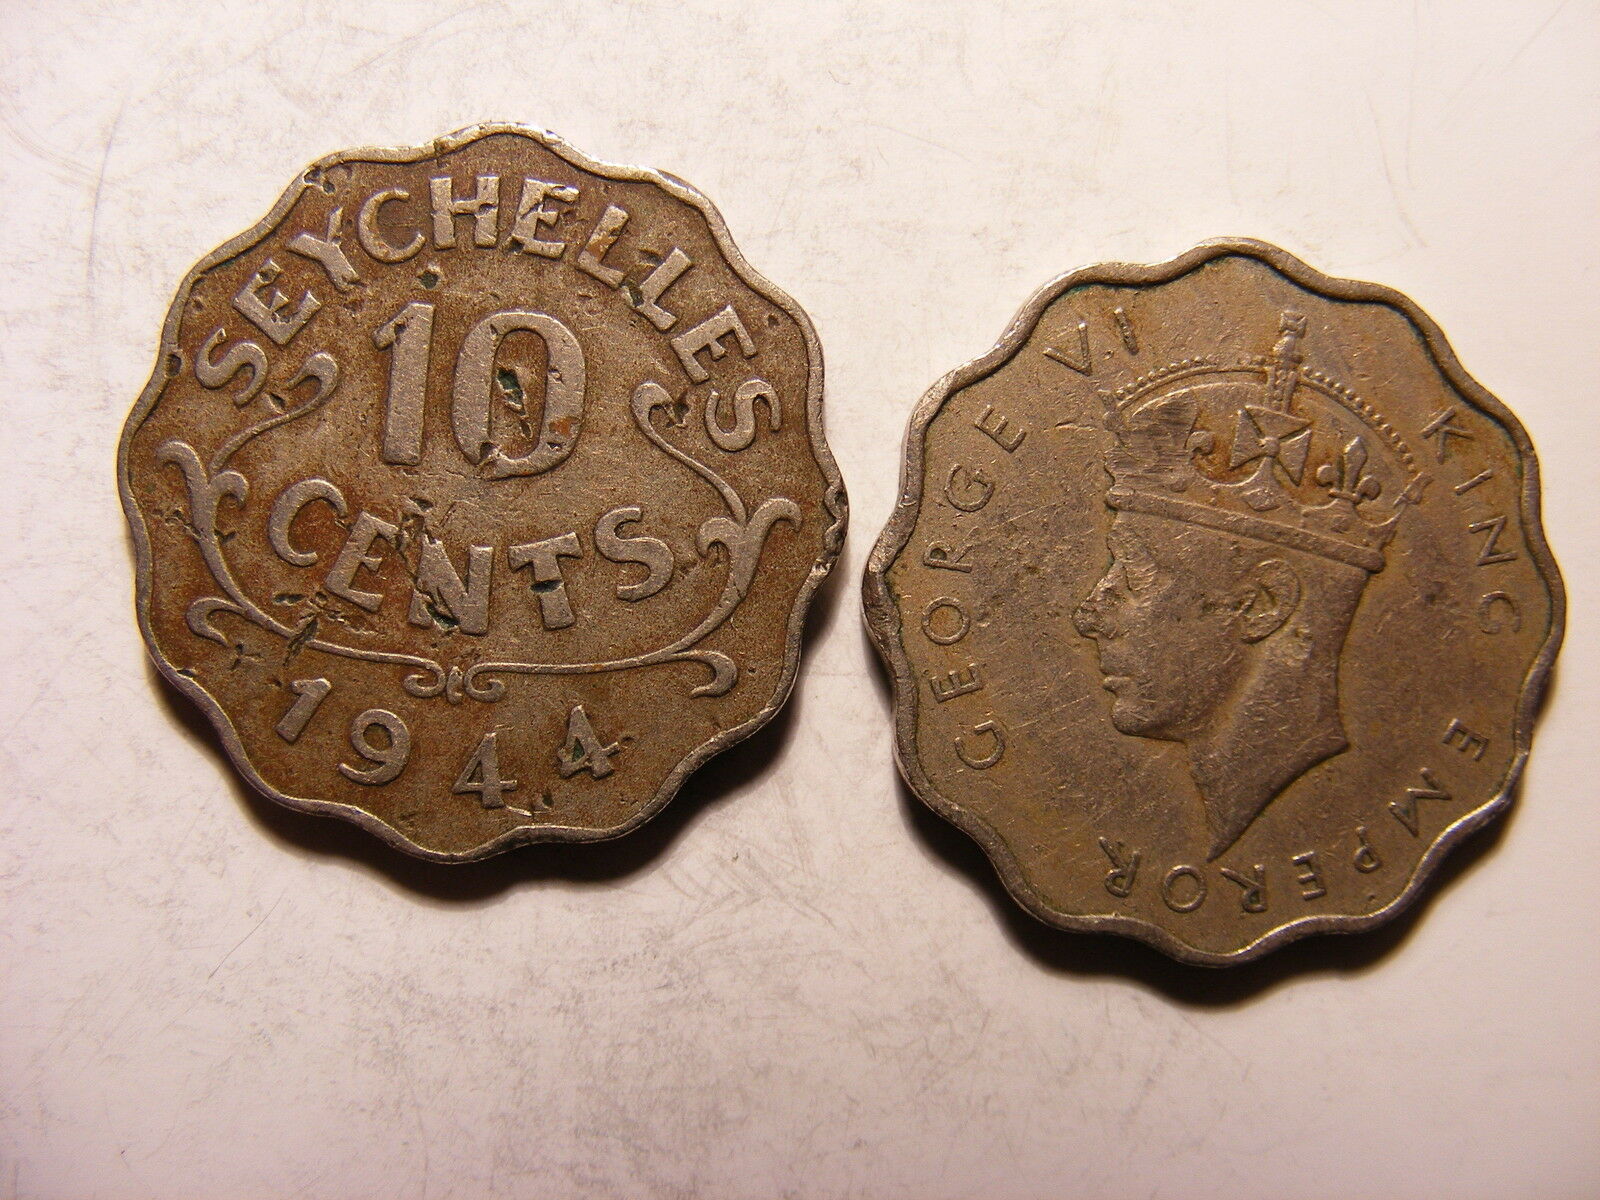 Seychelles 10 Cents, 1944, Average Circulated